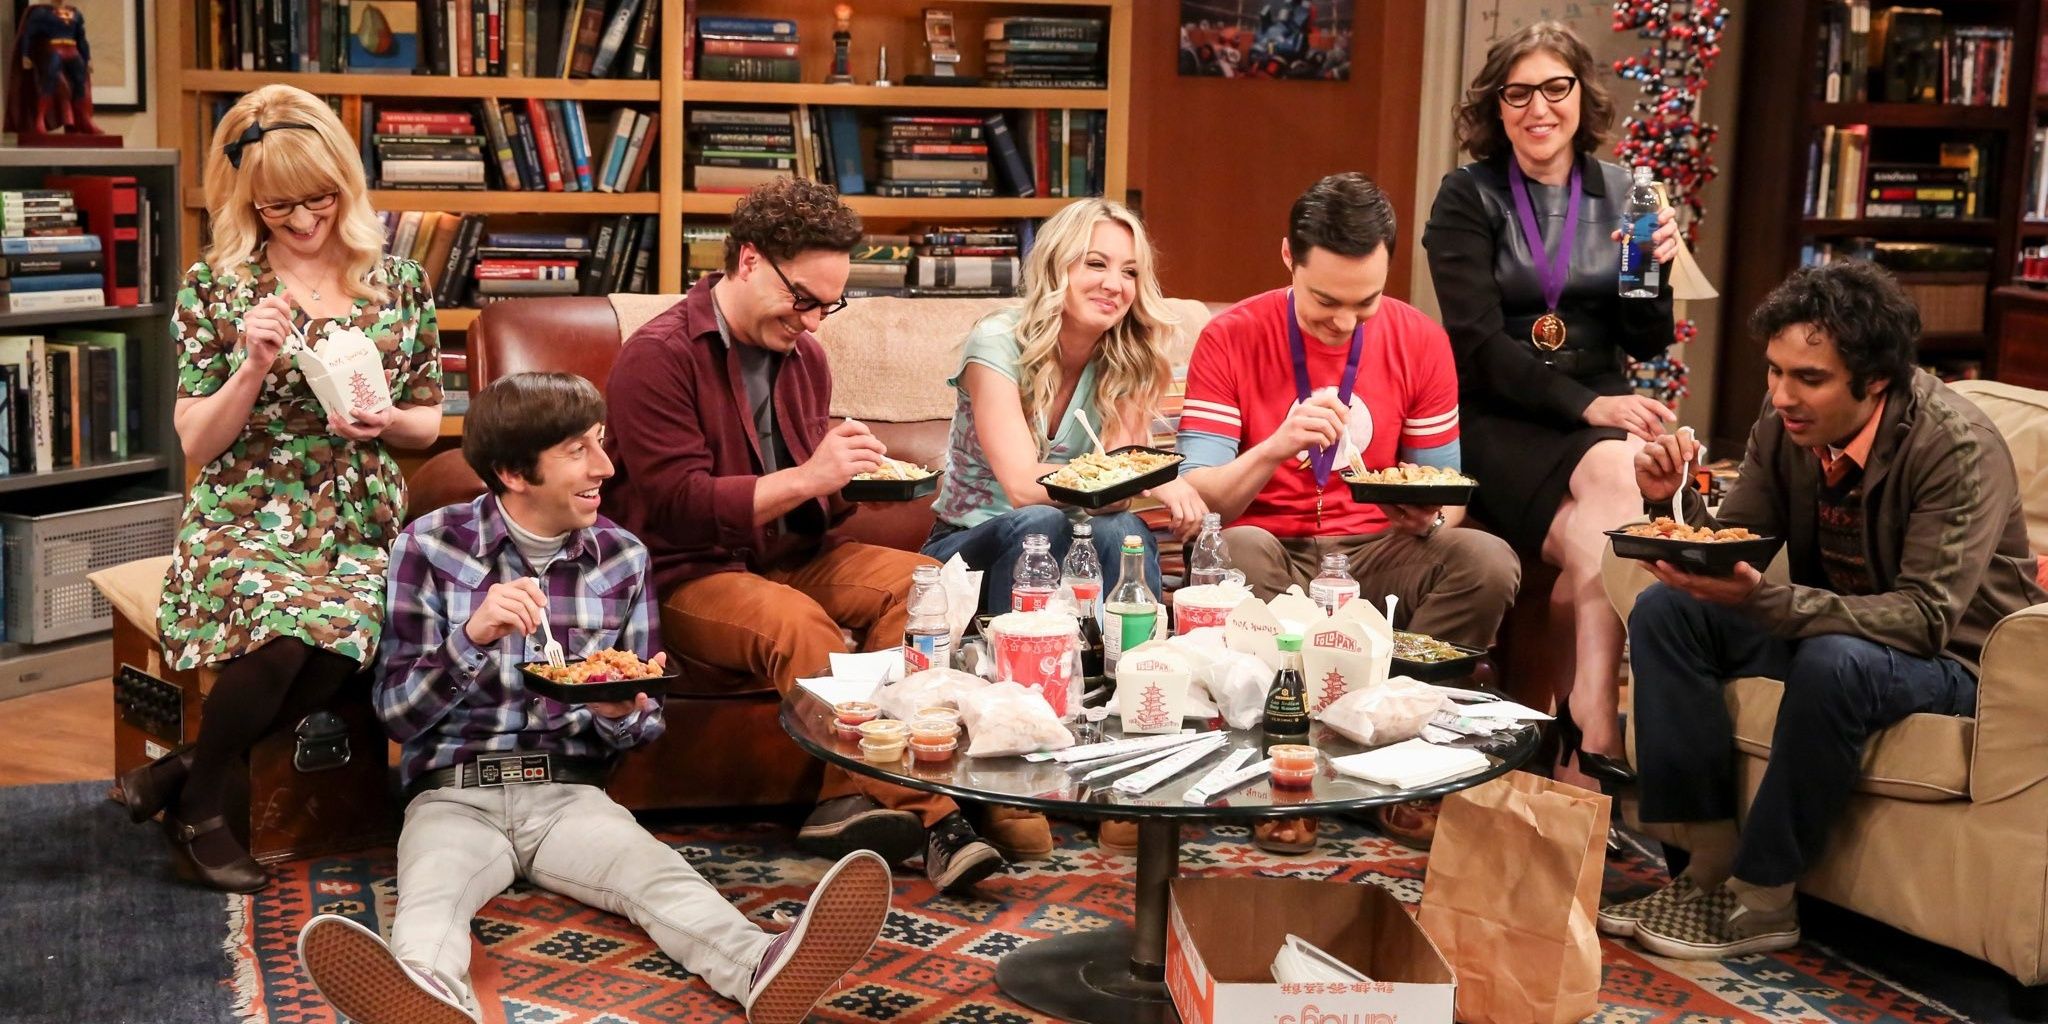 The gang eating food together in The Big Bang Theory